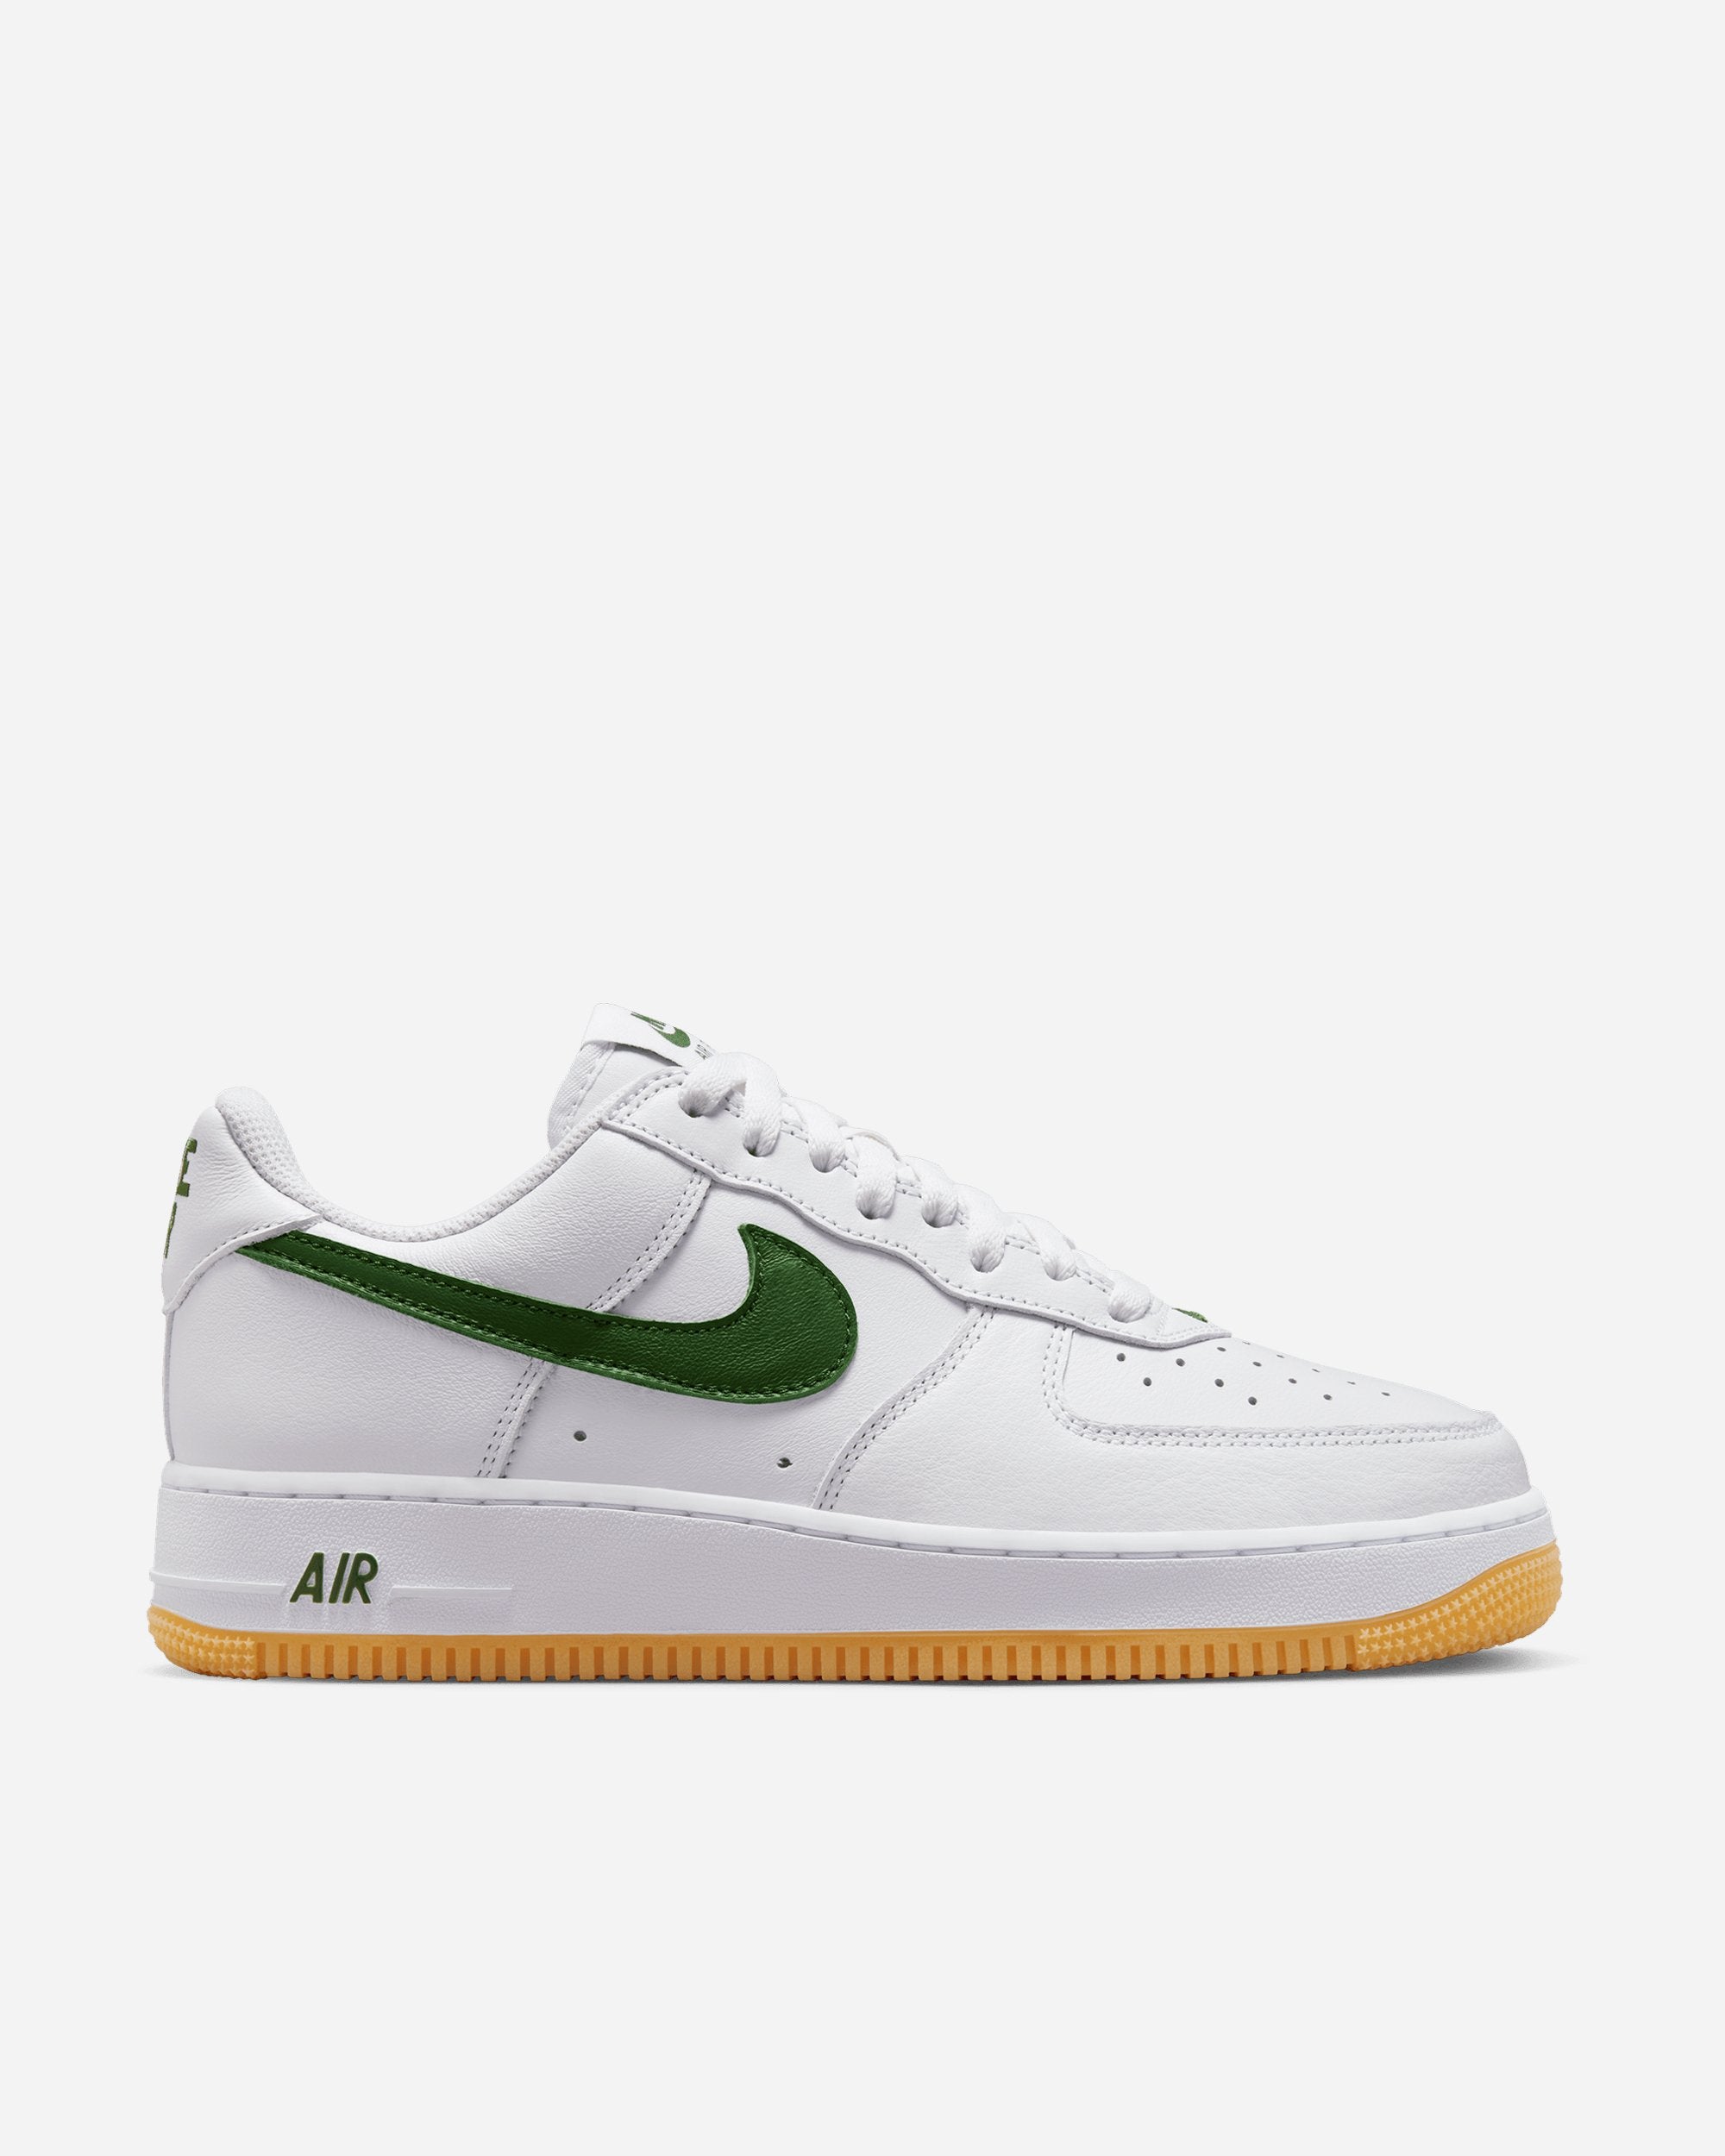 Nike Air Force 1 Low 'Color Of The Month' WHITE/FOREST GREEN-GUM YELLOW FD7039-101